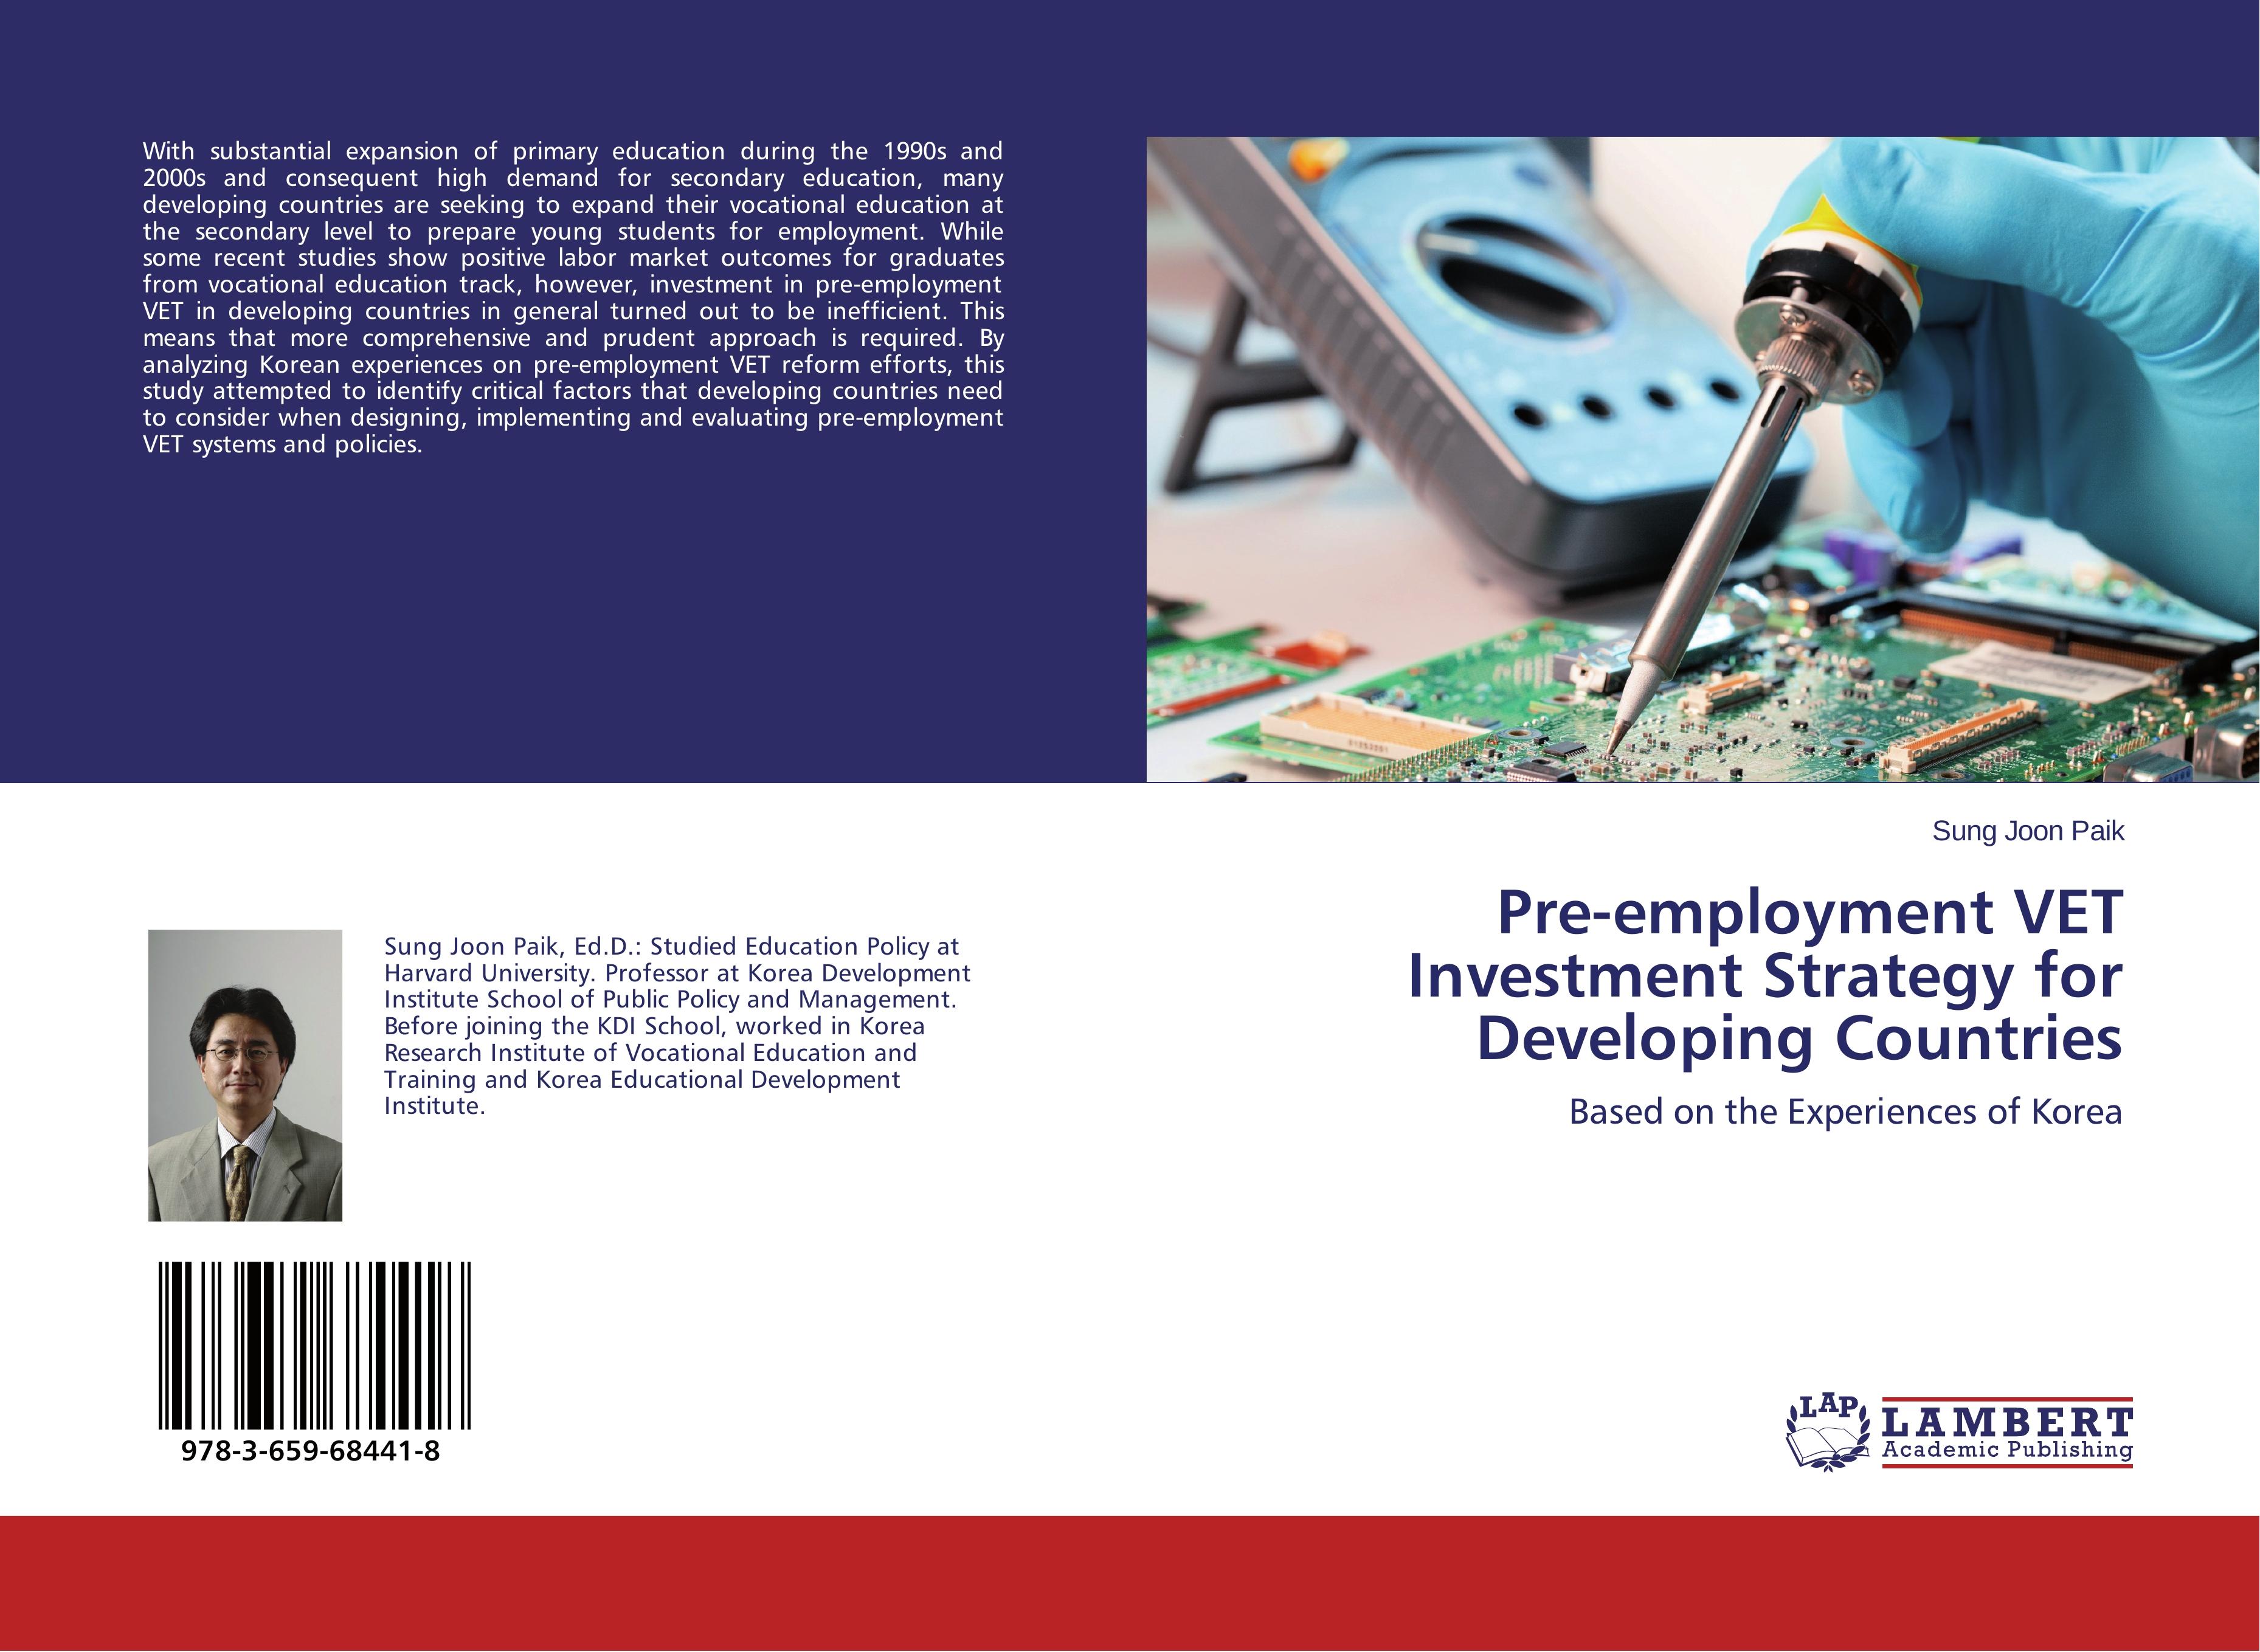 Pre-employment VET Investment Strategy for Developing Countries - Sung Joon Paik